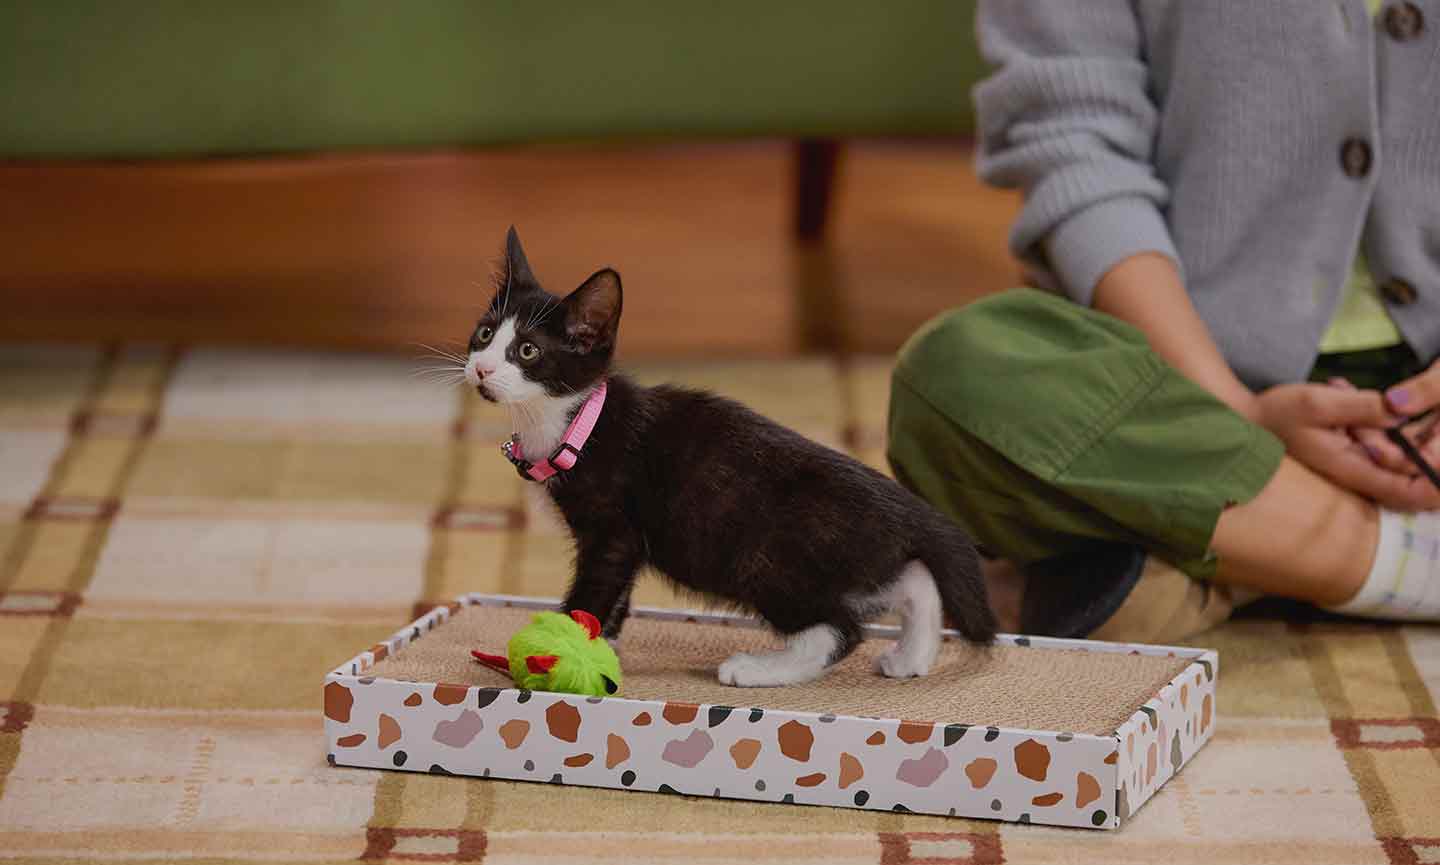 A kitten playing with a scratcher and cat toy